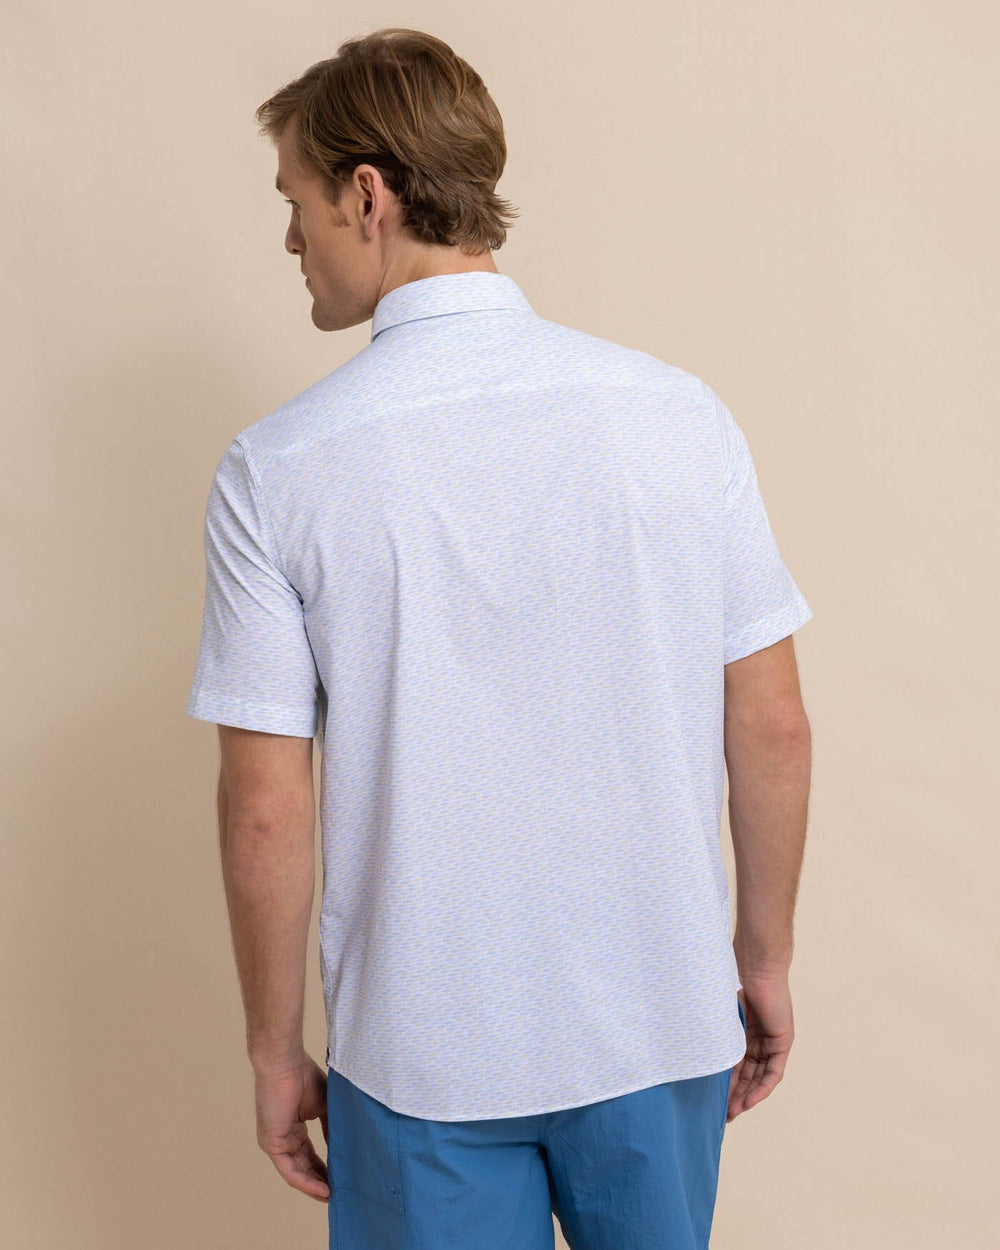 The back view of the Southern Tide brrr Intercoastal Casual Water Short Sleeve SportShirt by Southern Tide - Classic White